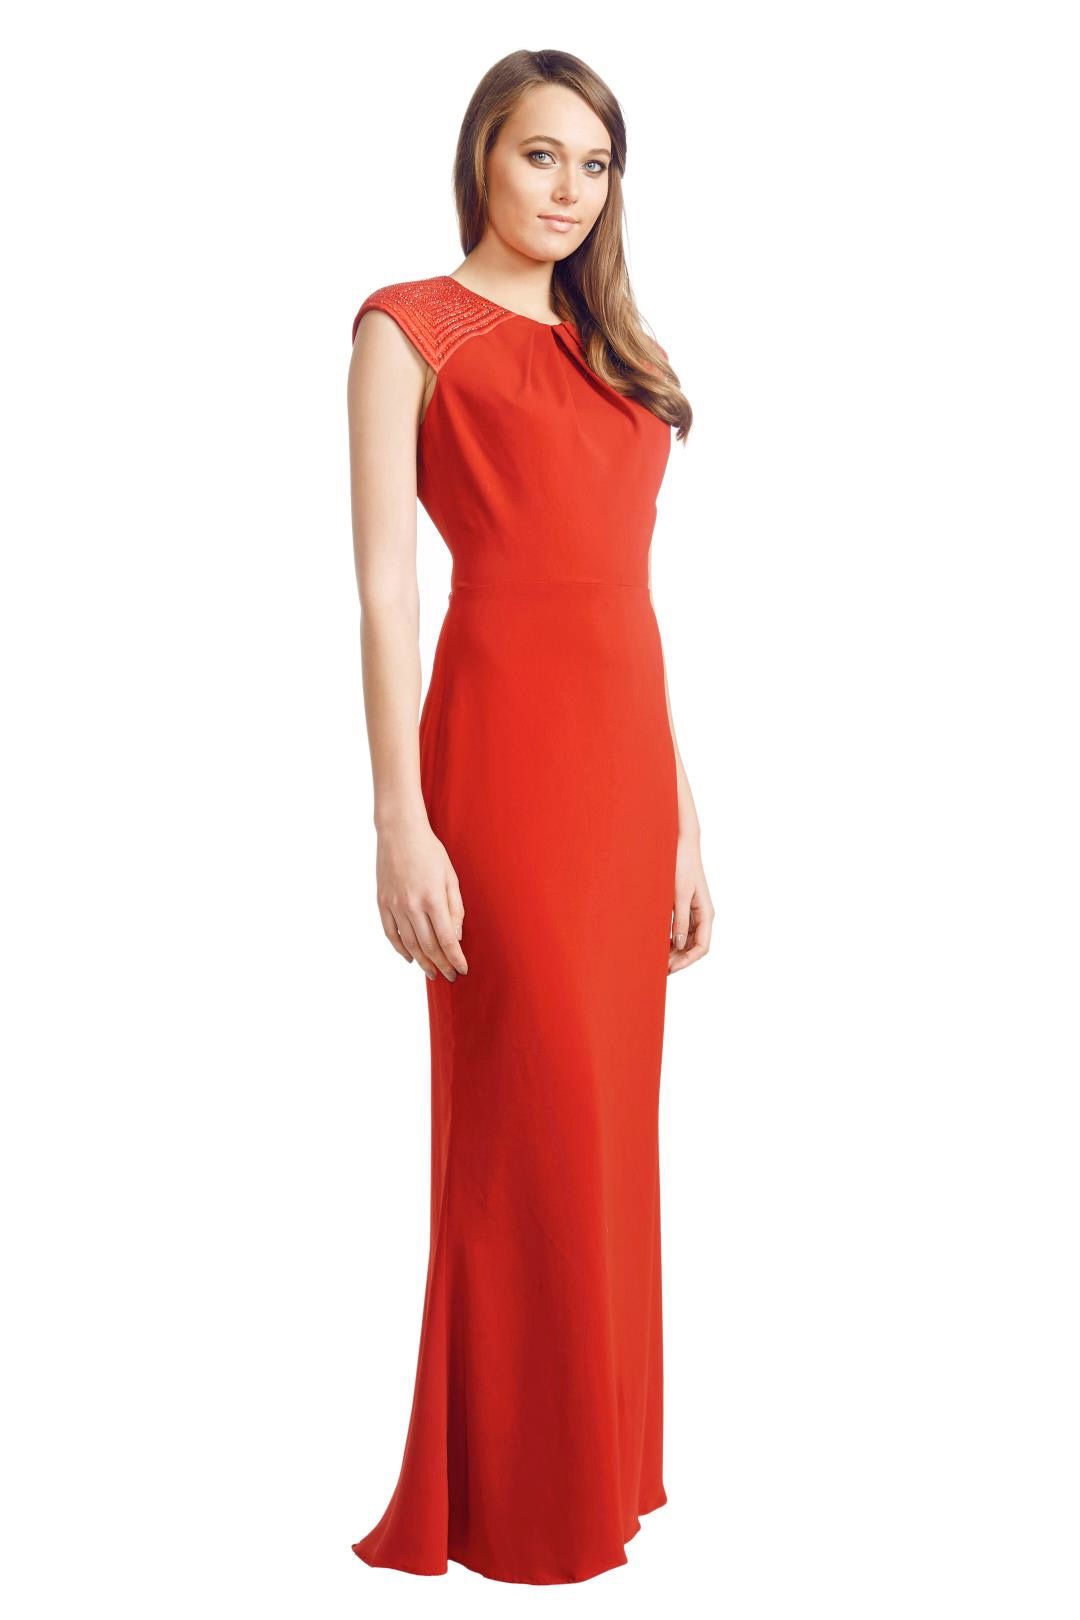 Badgley Mischka - Bedazzled Gown - Red - Side